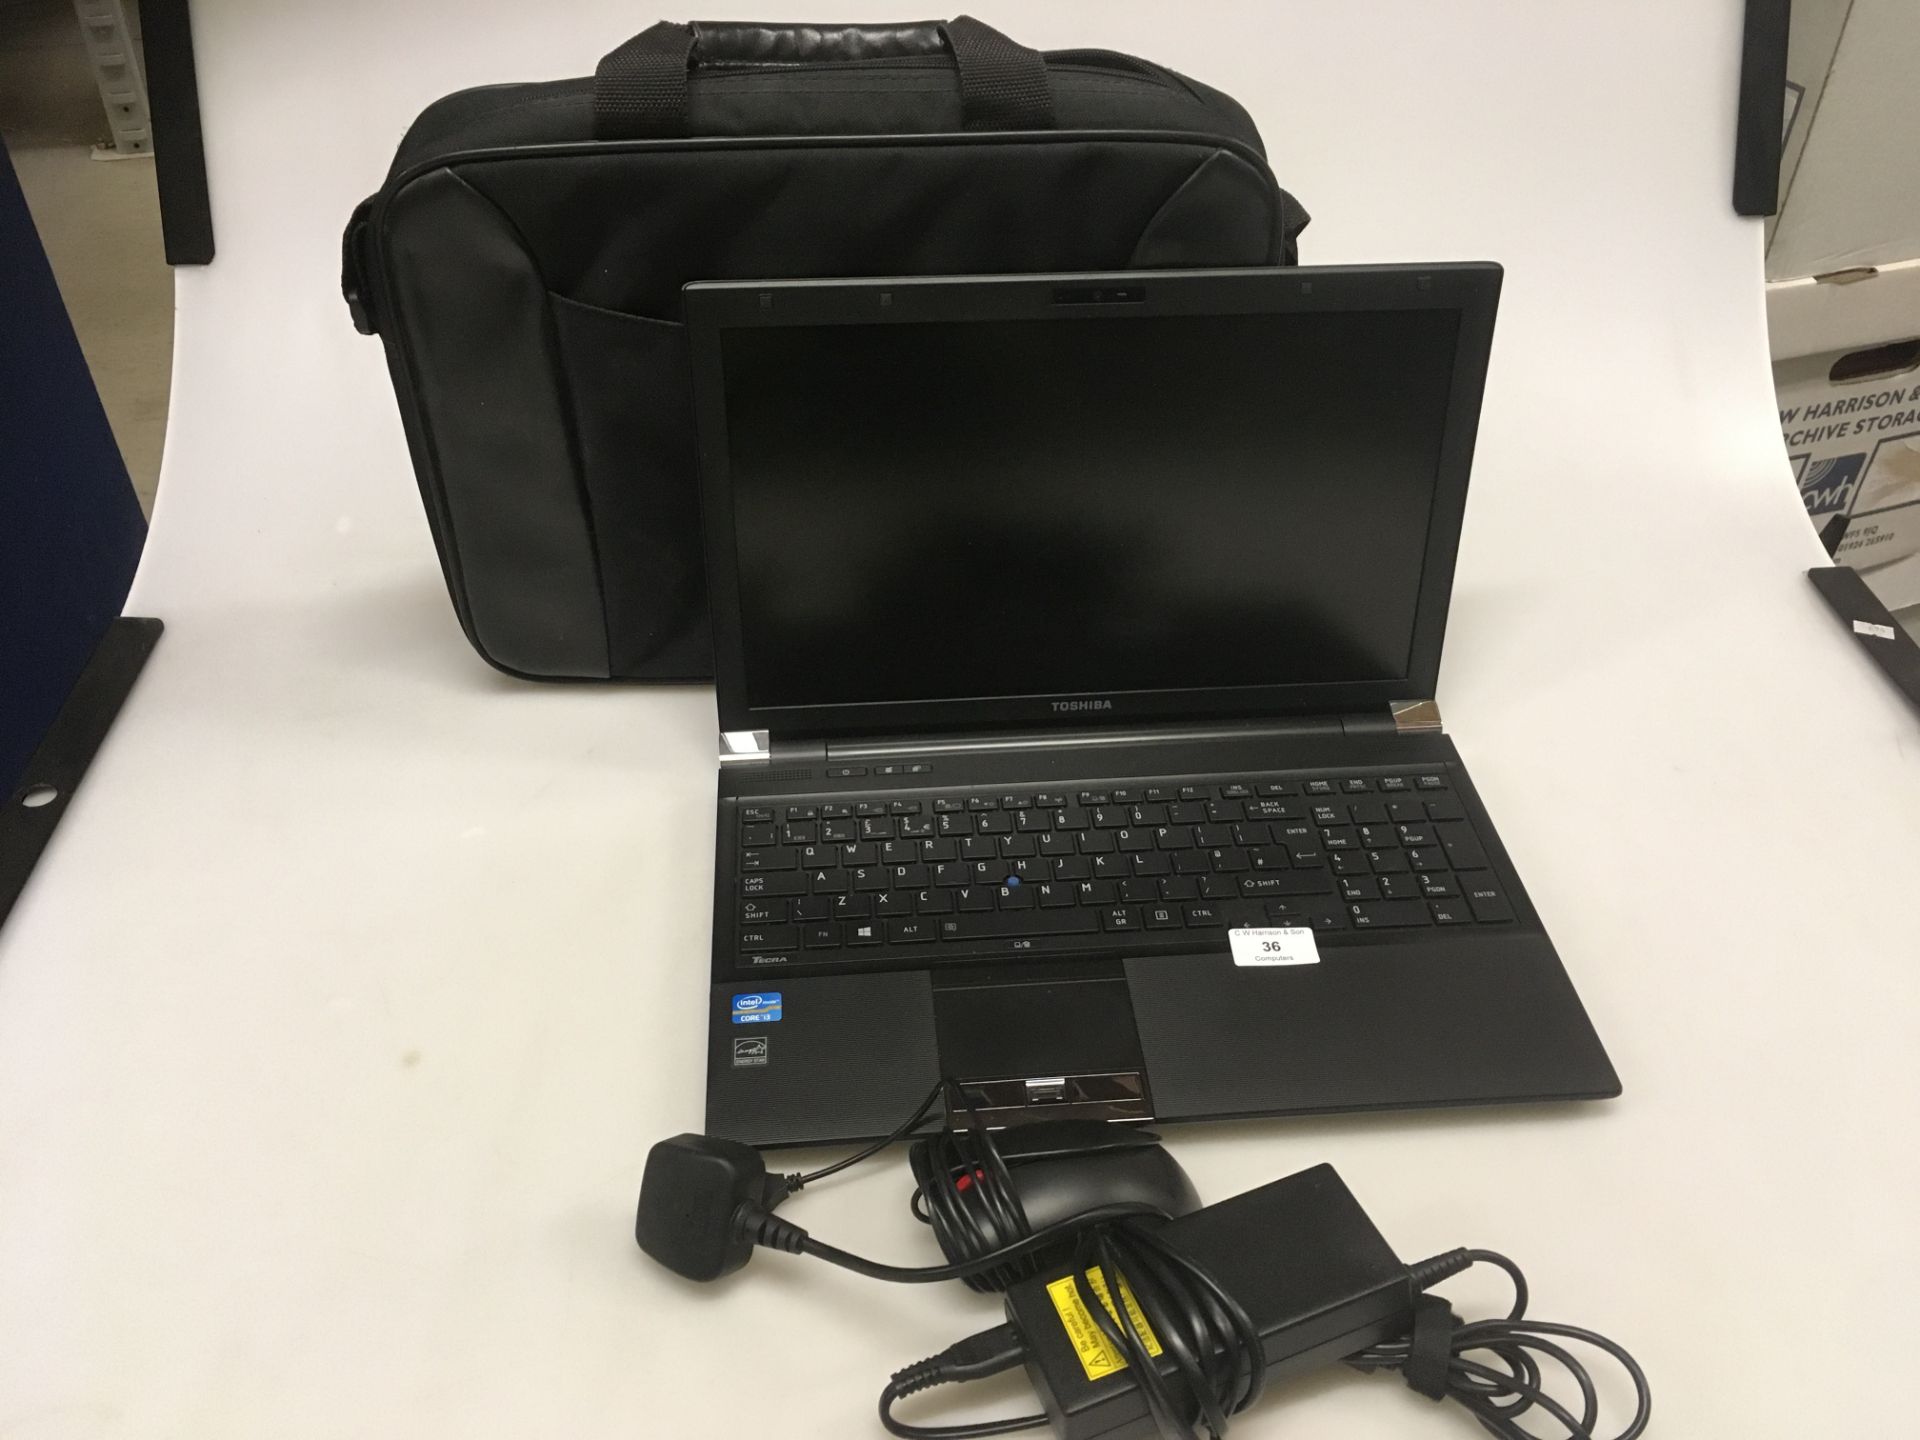 Toshiba Tecra R950-1EJ laptop computer with power adapter and bag